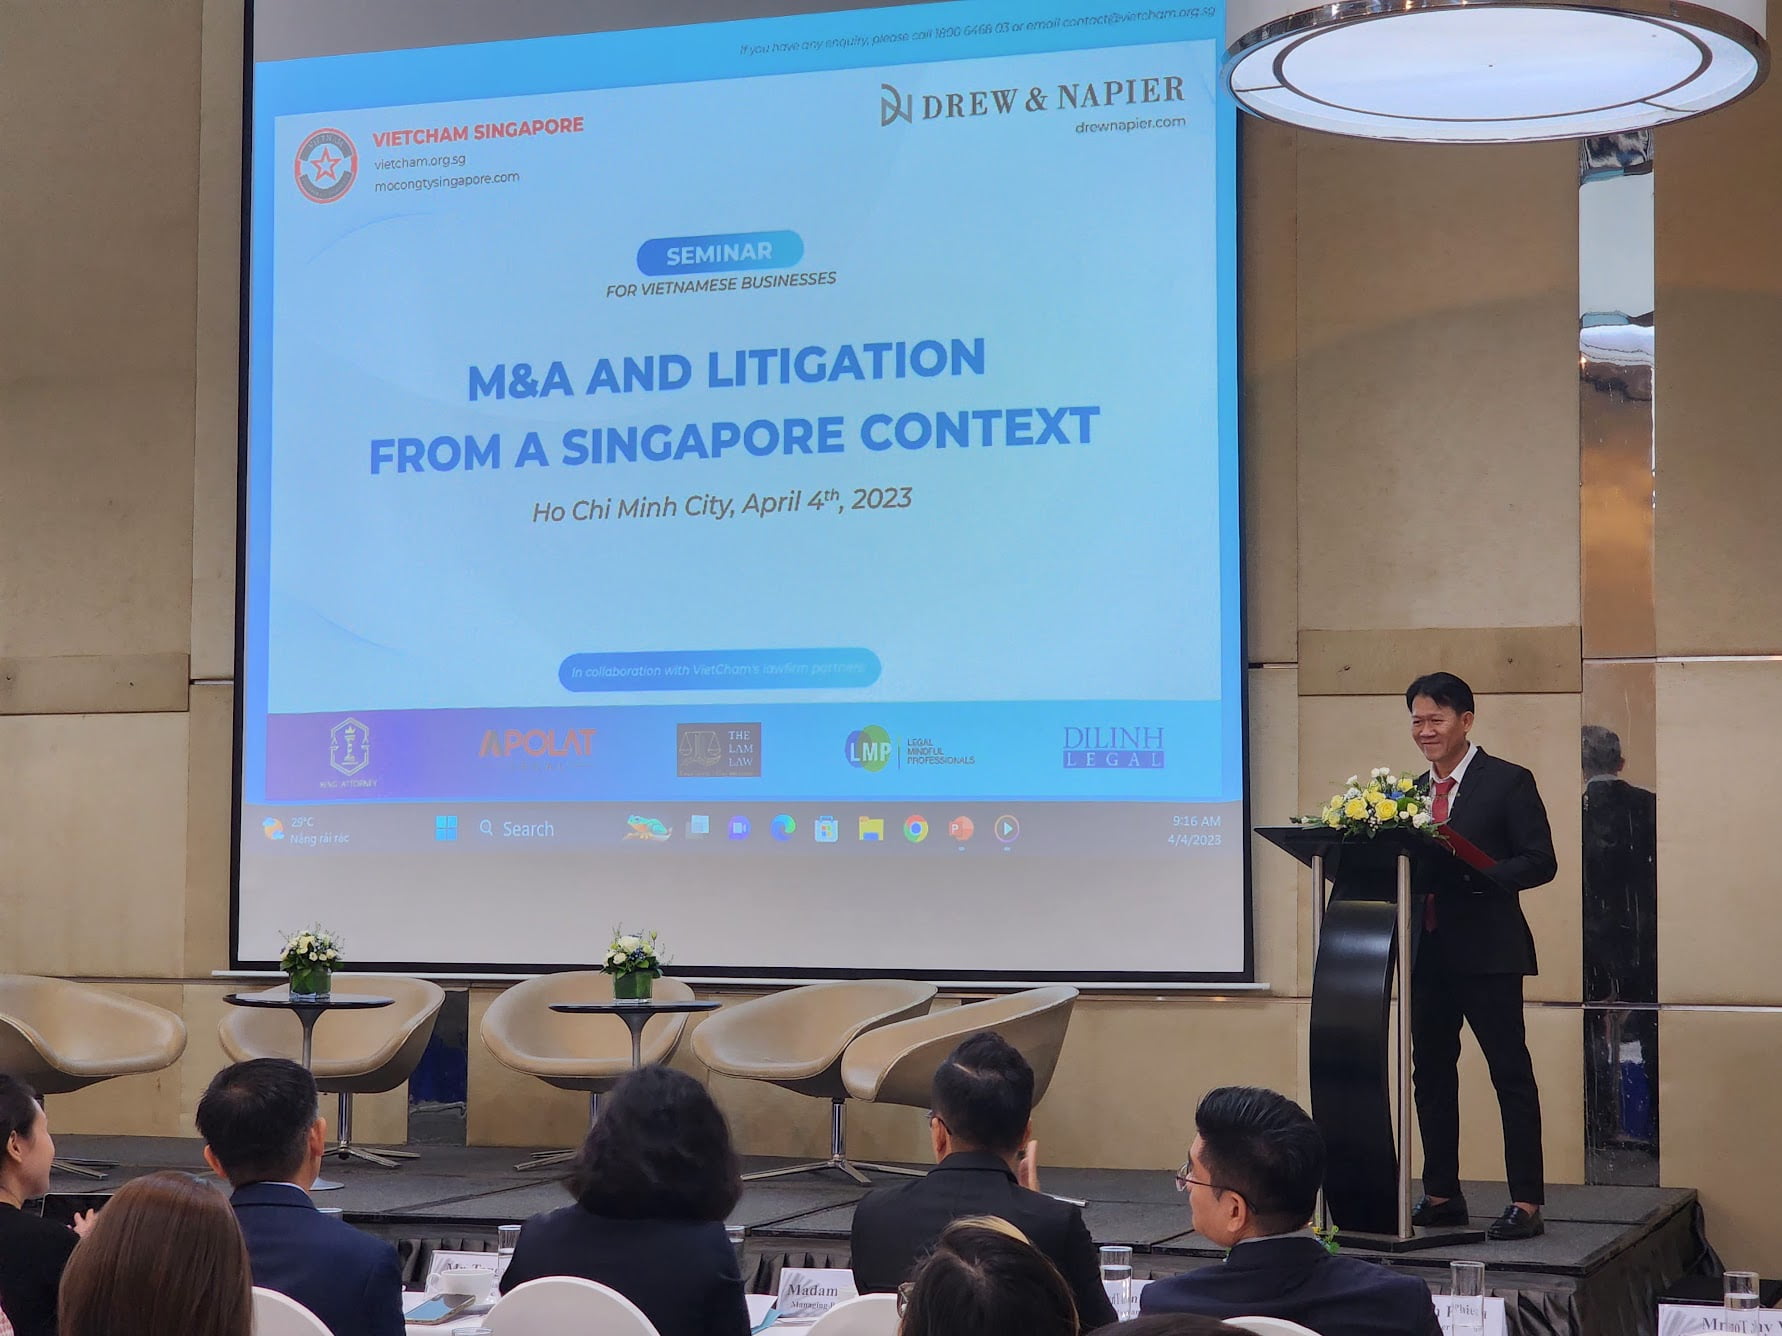 M&A and Litigation from a Singapore Context